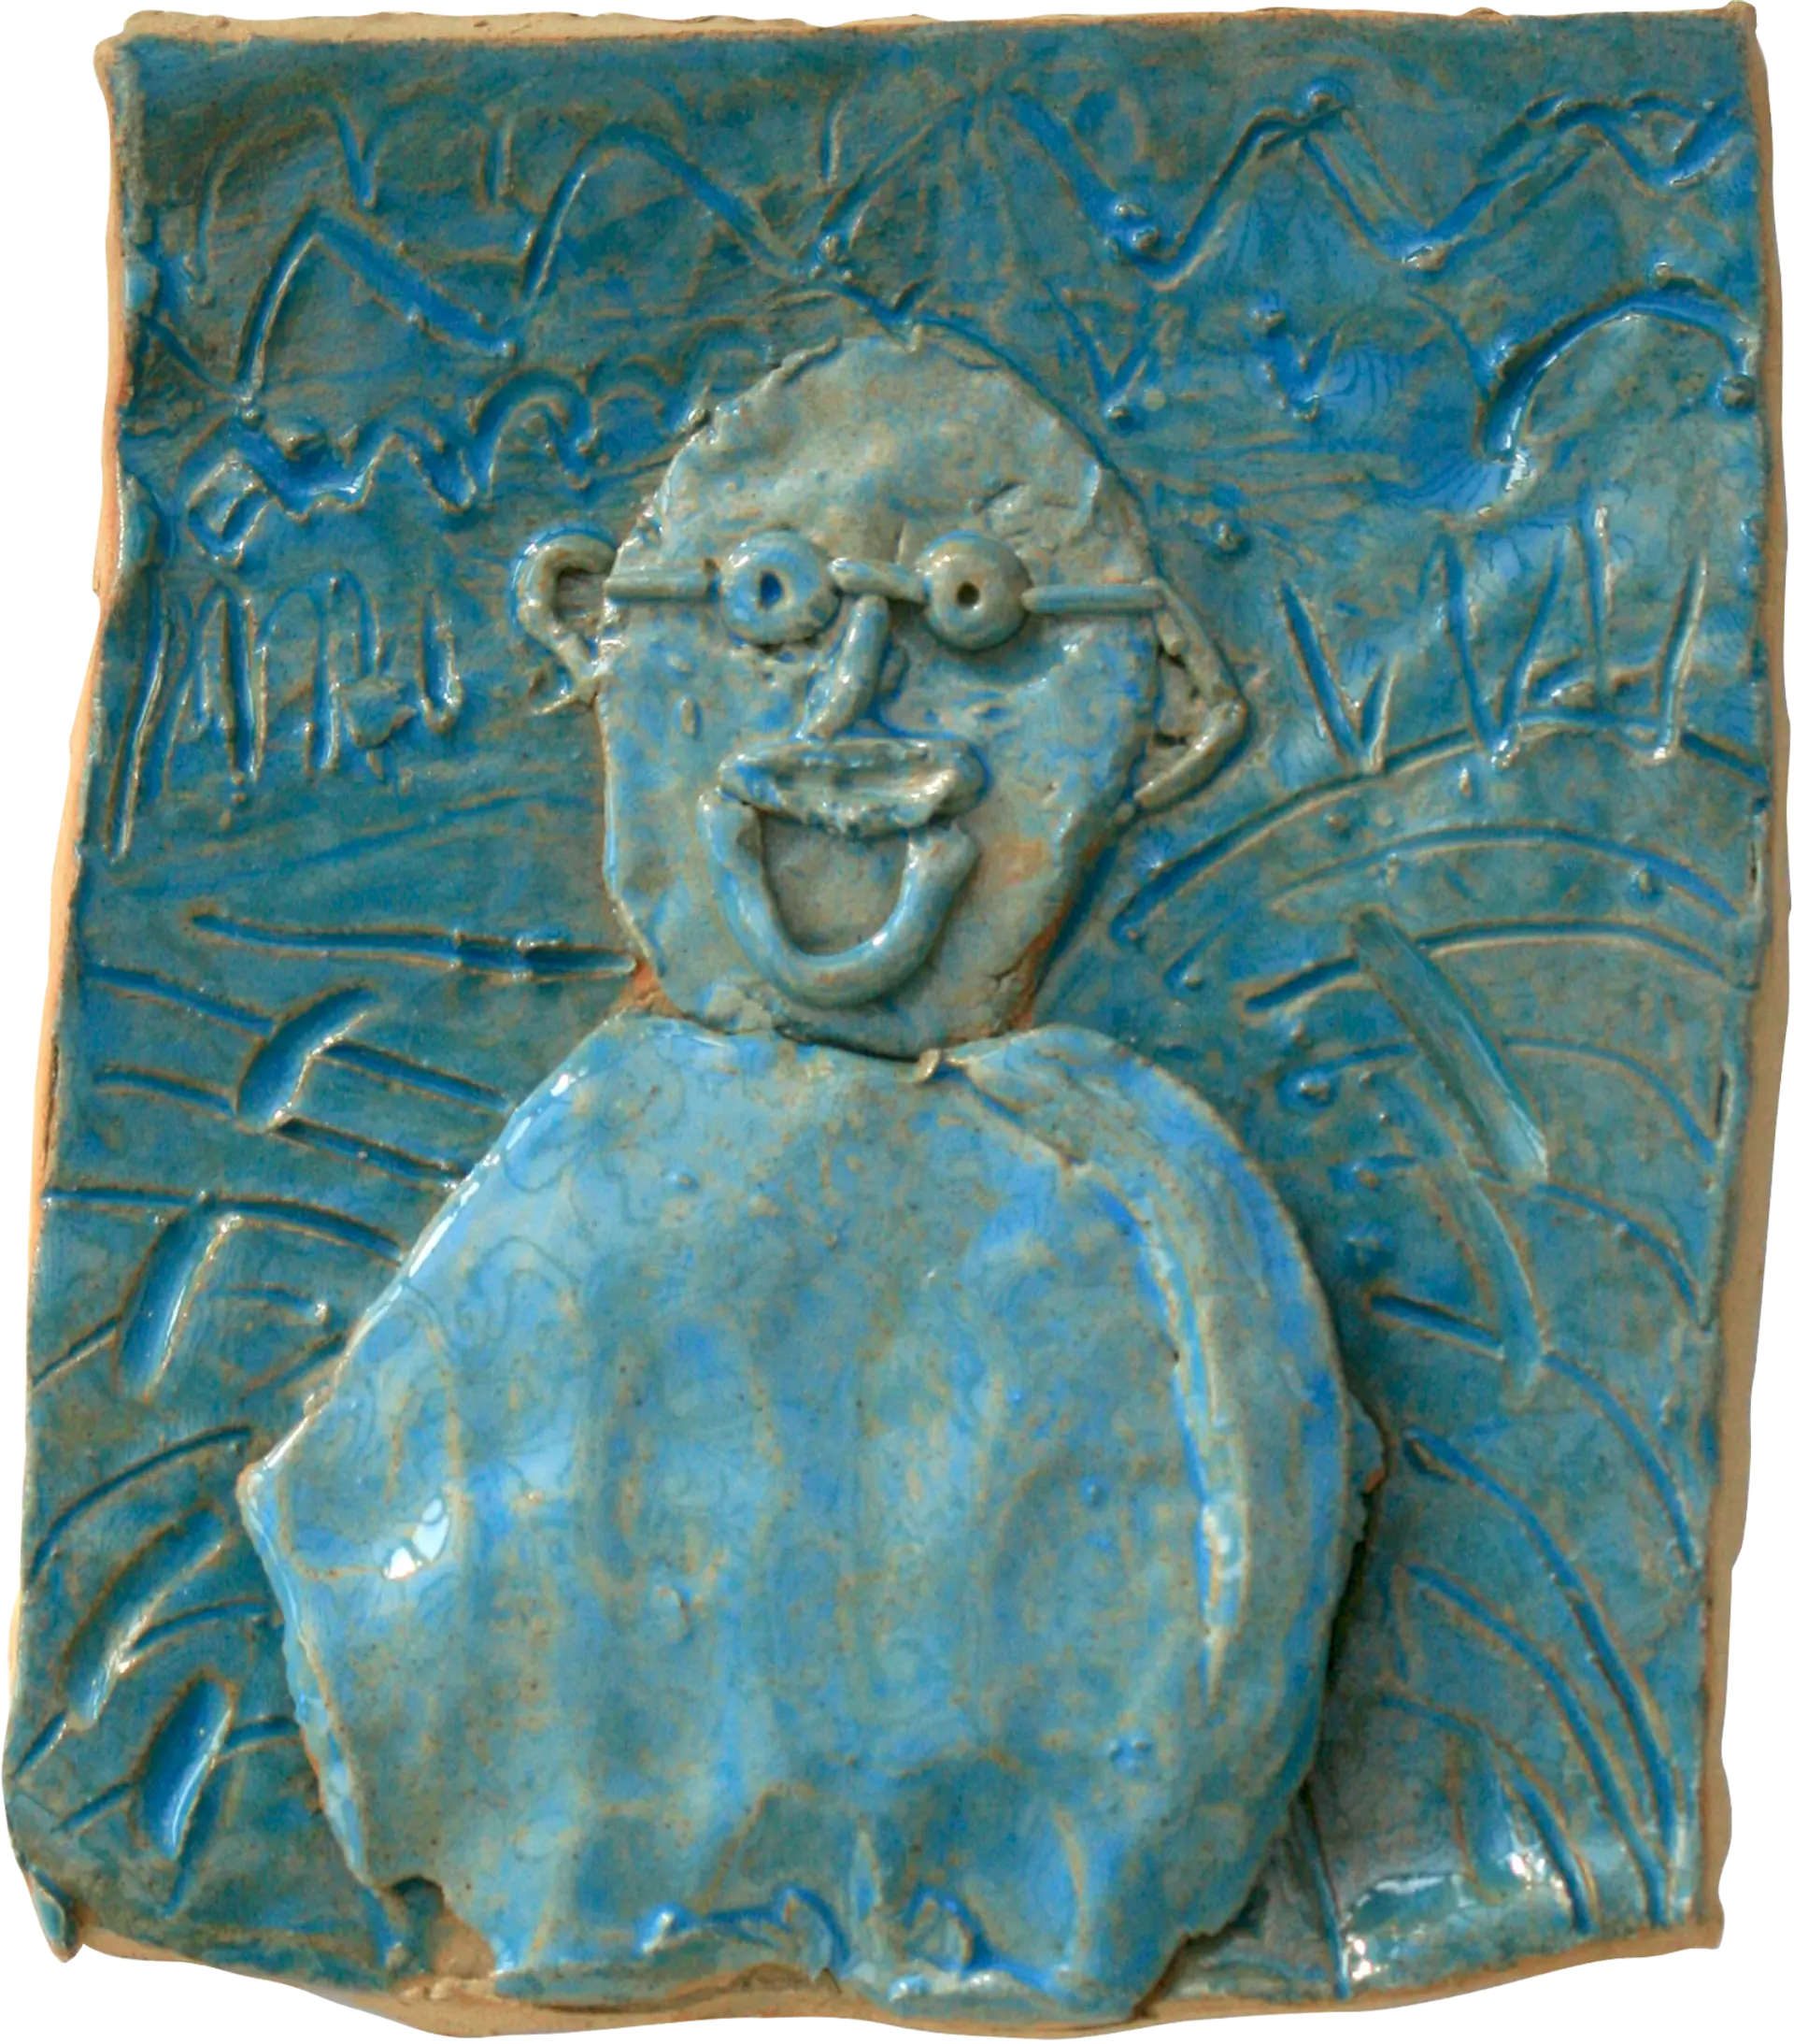 A blue glazed ceramic tile of Maria’s dad. He is wearing glasses and has a moustache. He is smiling. The background is decorated with wavy lines.